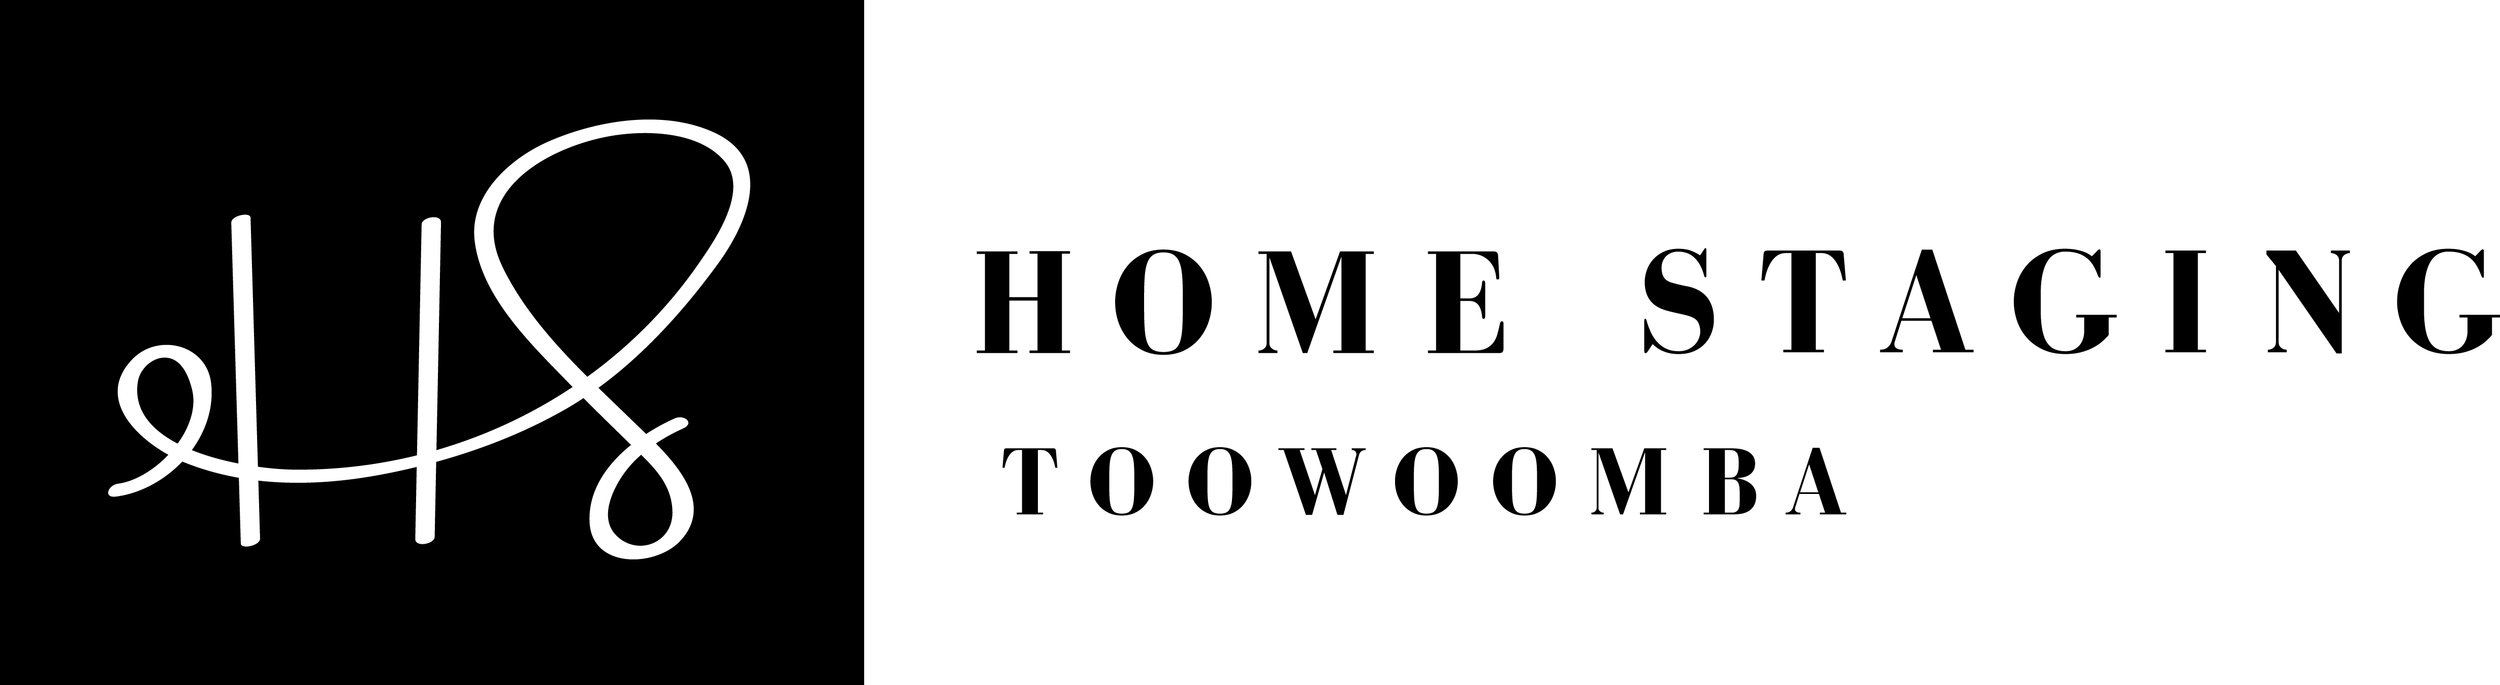 Home Staging Toowoomba